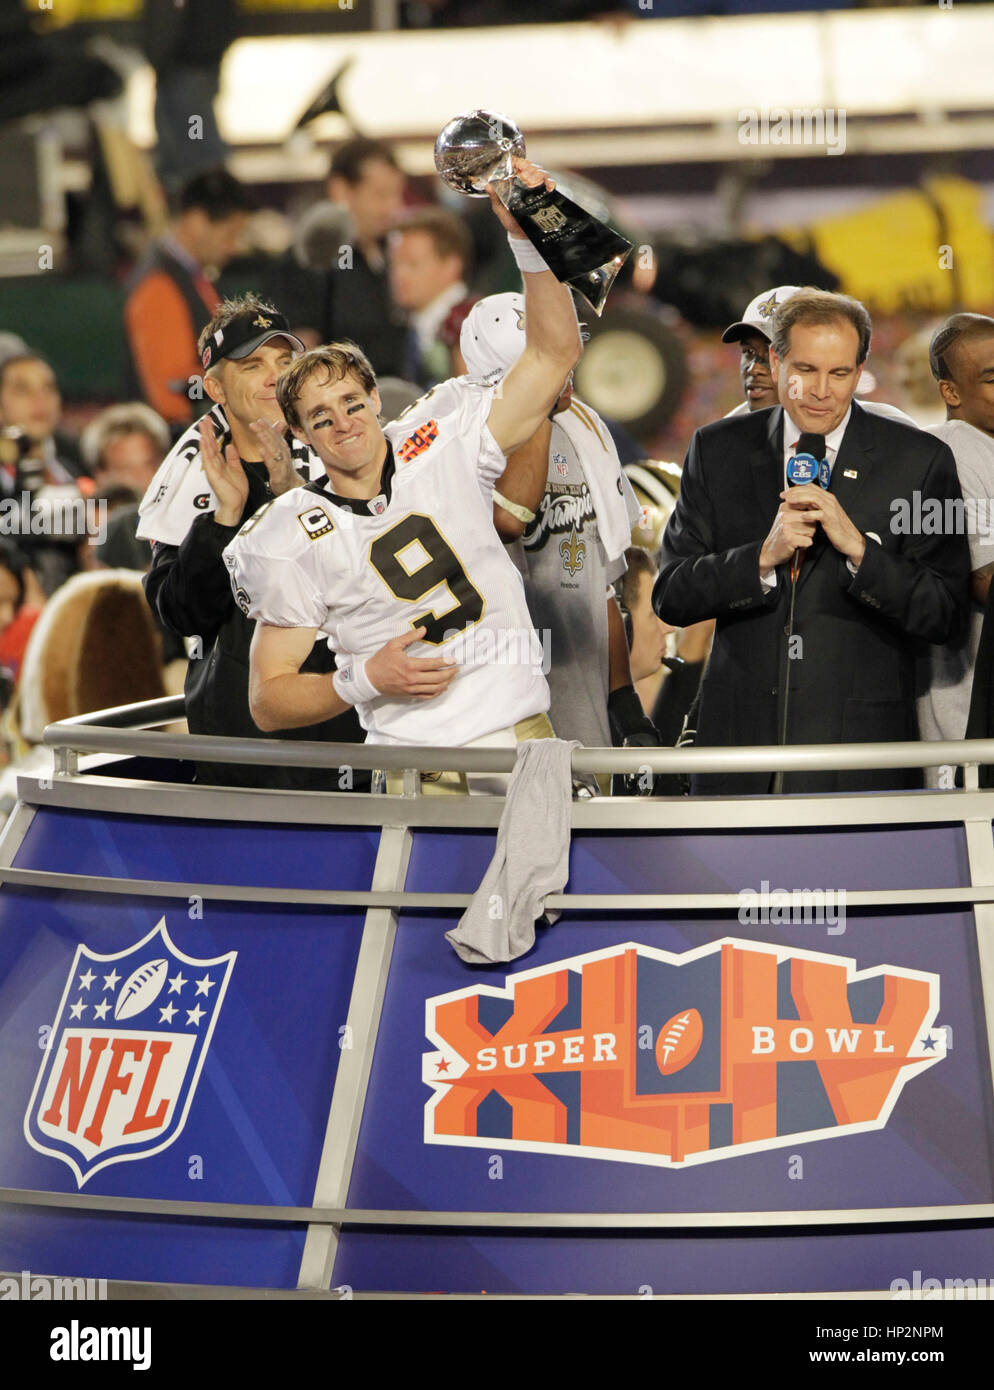 New Orleans Saints quarterback Dree Brees holds the Vince Lombardi Trophy at the Super Bowl in Miami, Florida on February 7, 2010. Photo by Francis Specker Stock Photo